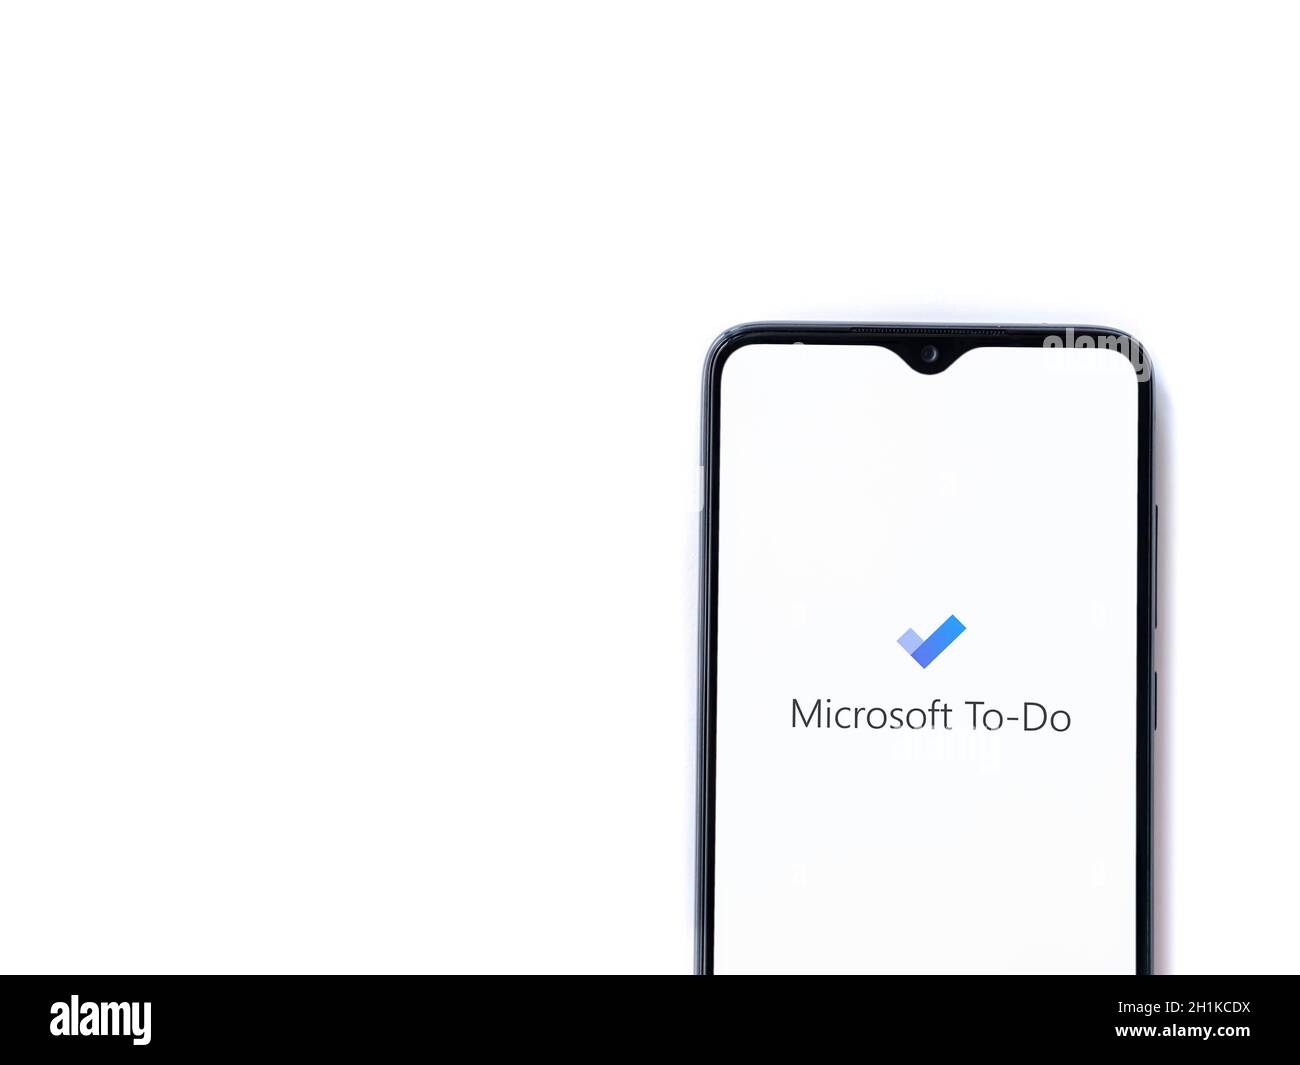 Lod, Israel - July 8, 2020: Microsoft To Do app launch screen with logo on the display of a black mobile smartphone isolated on white background. Top Stock Photo